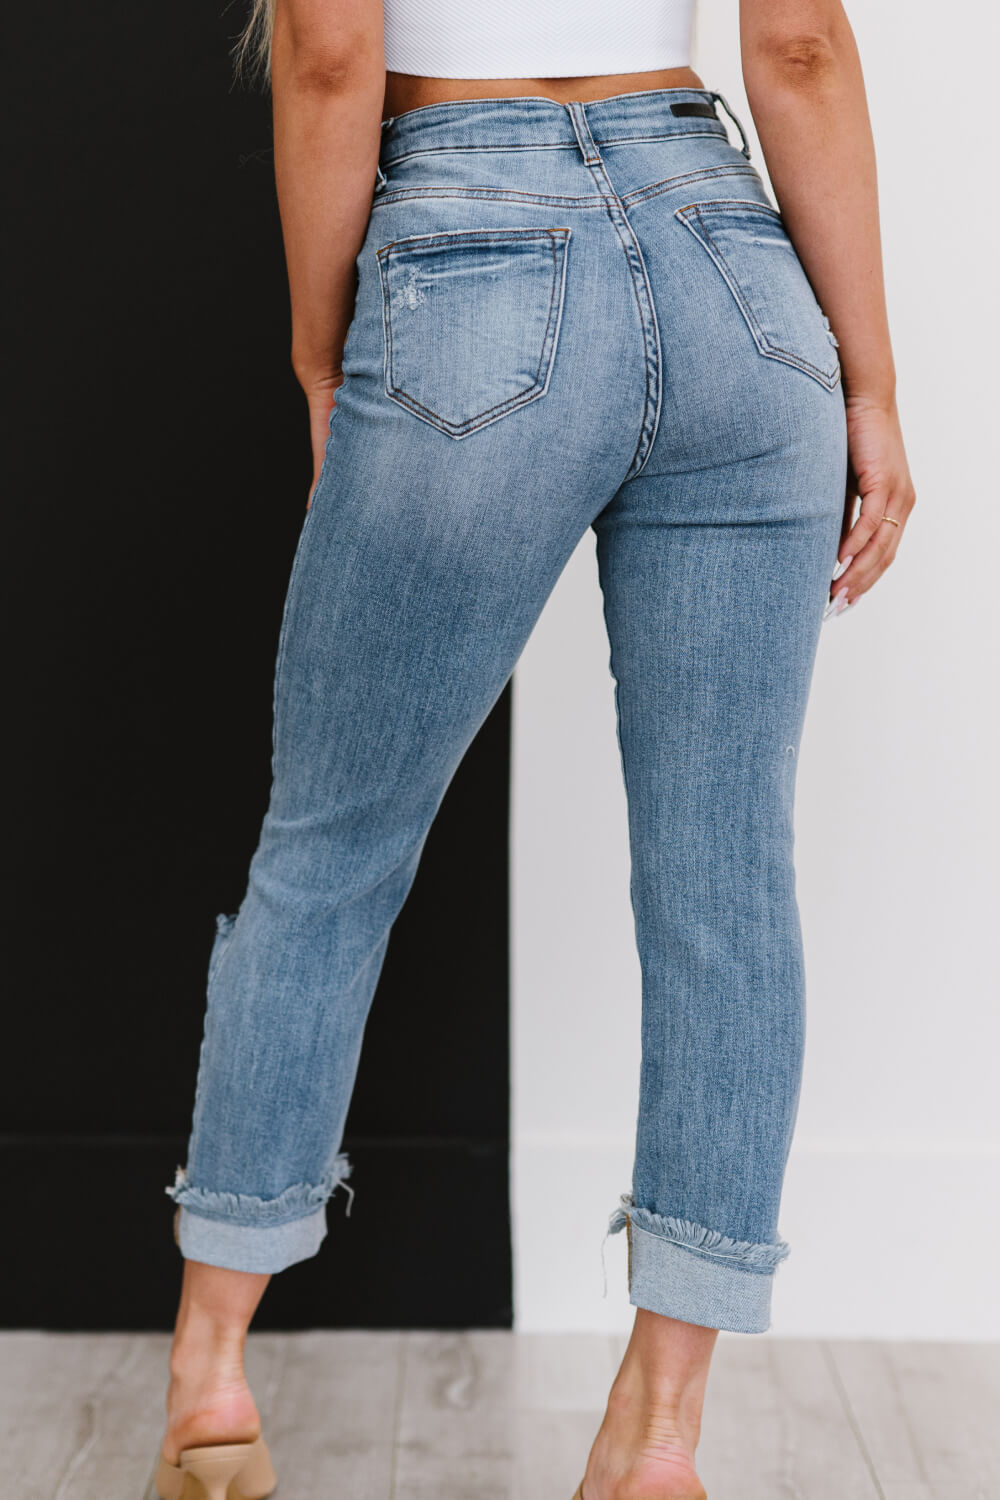 Taking It Easy Distressed Jeans